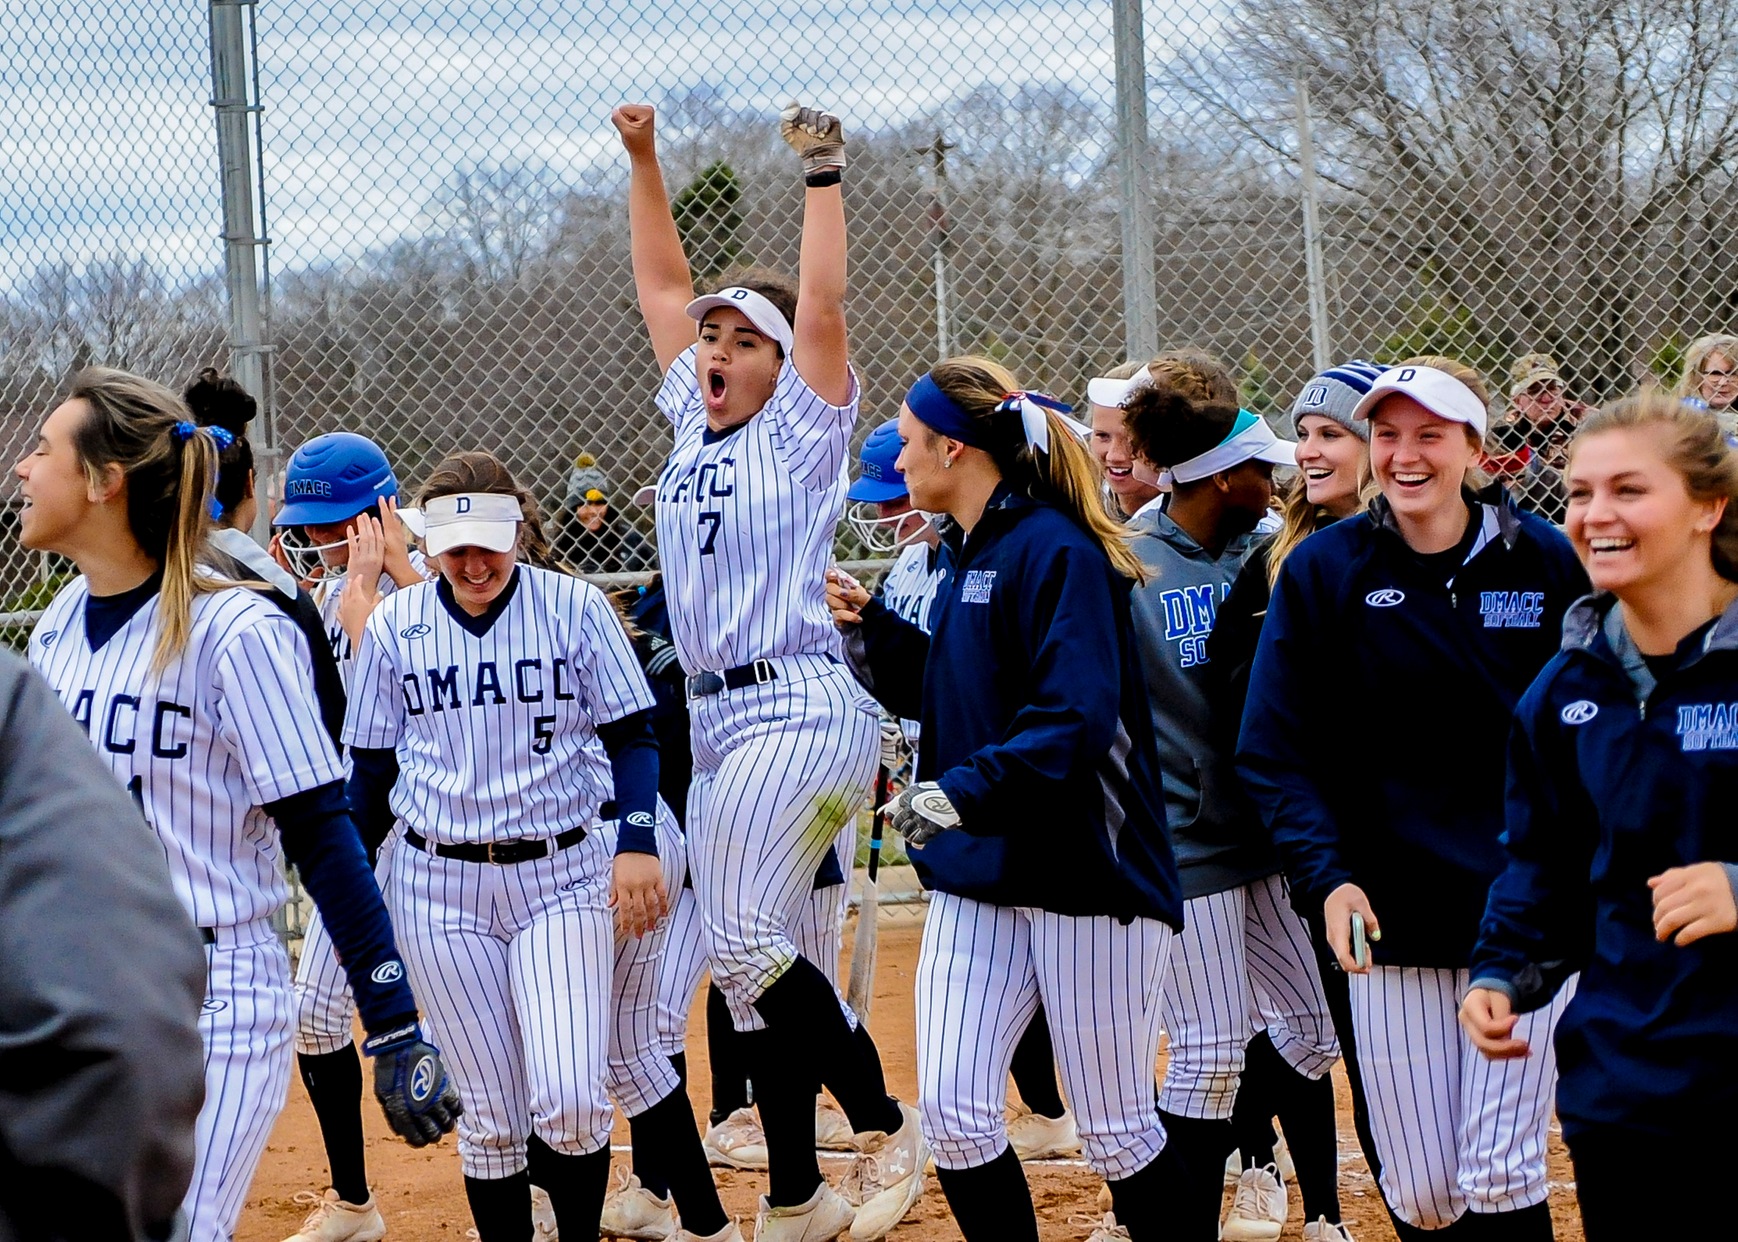 DMACC softball team sweeps doubleheader from KCC in matchup of ranked teams